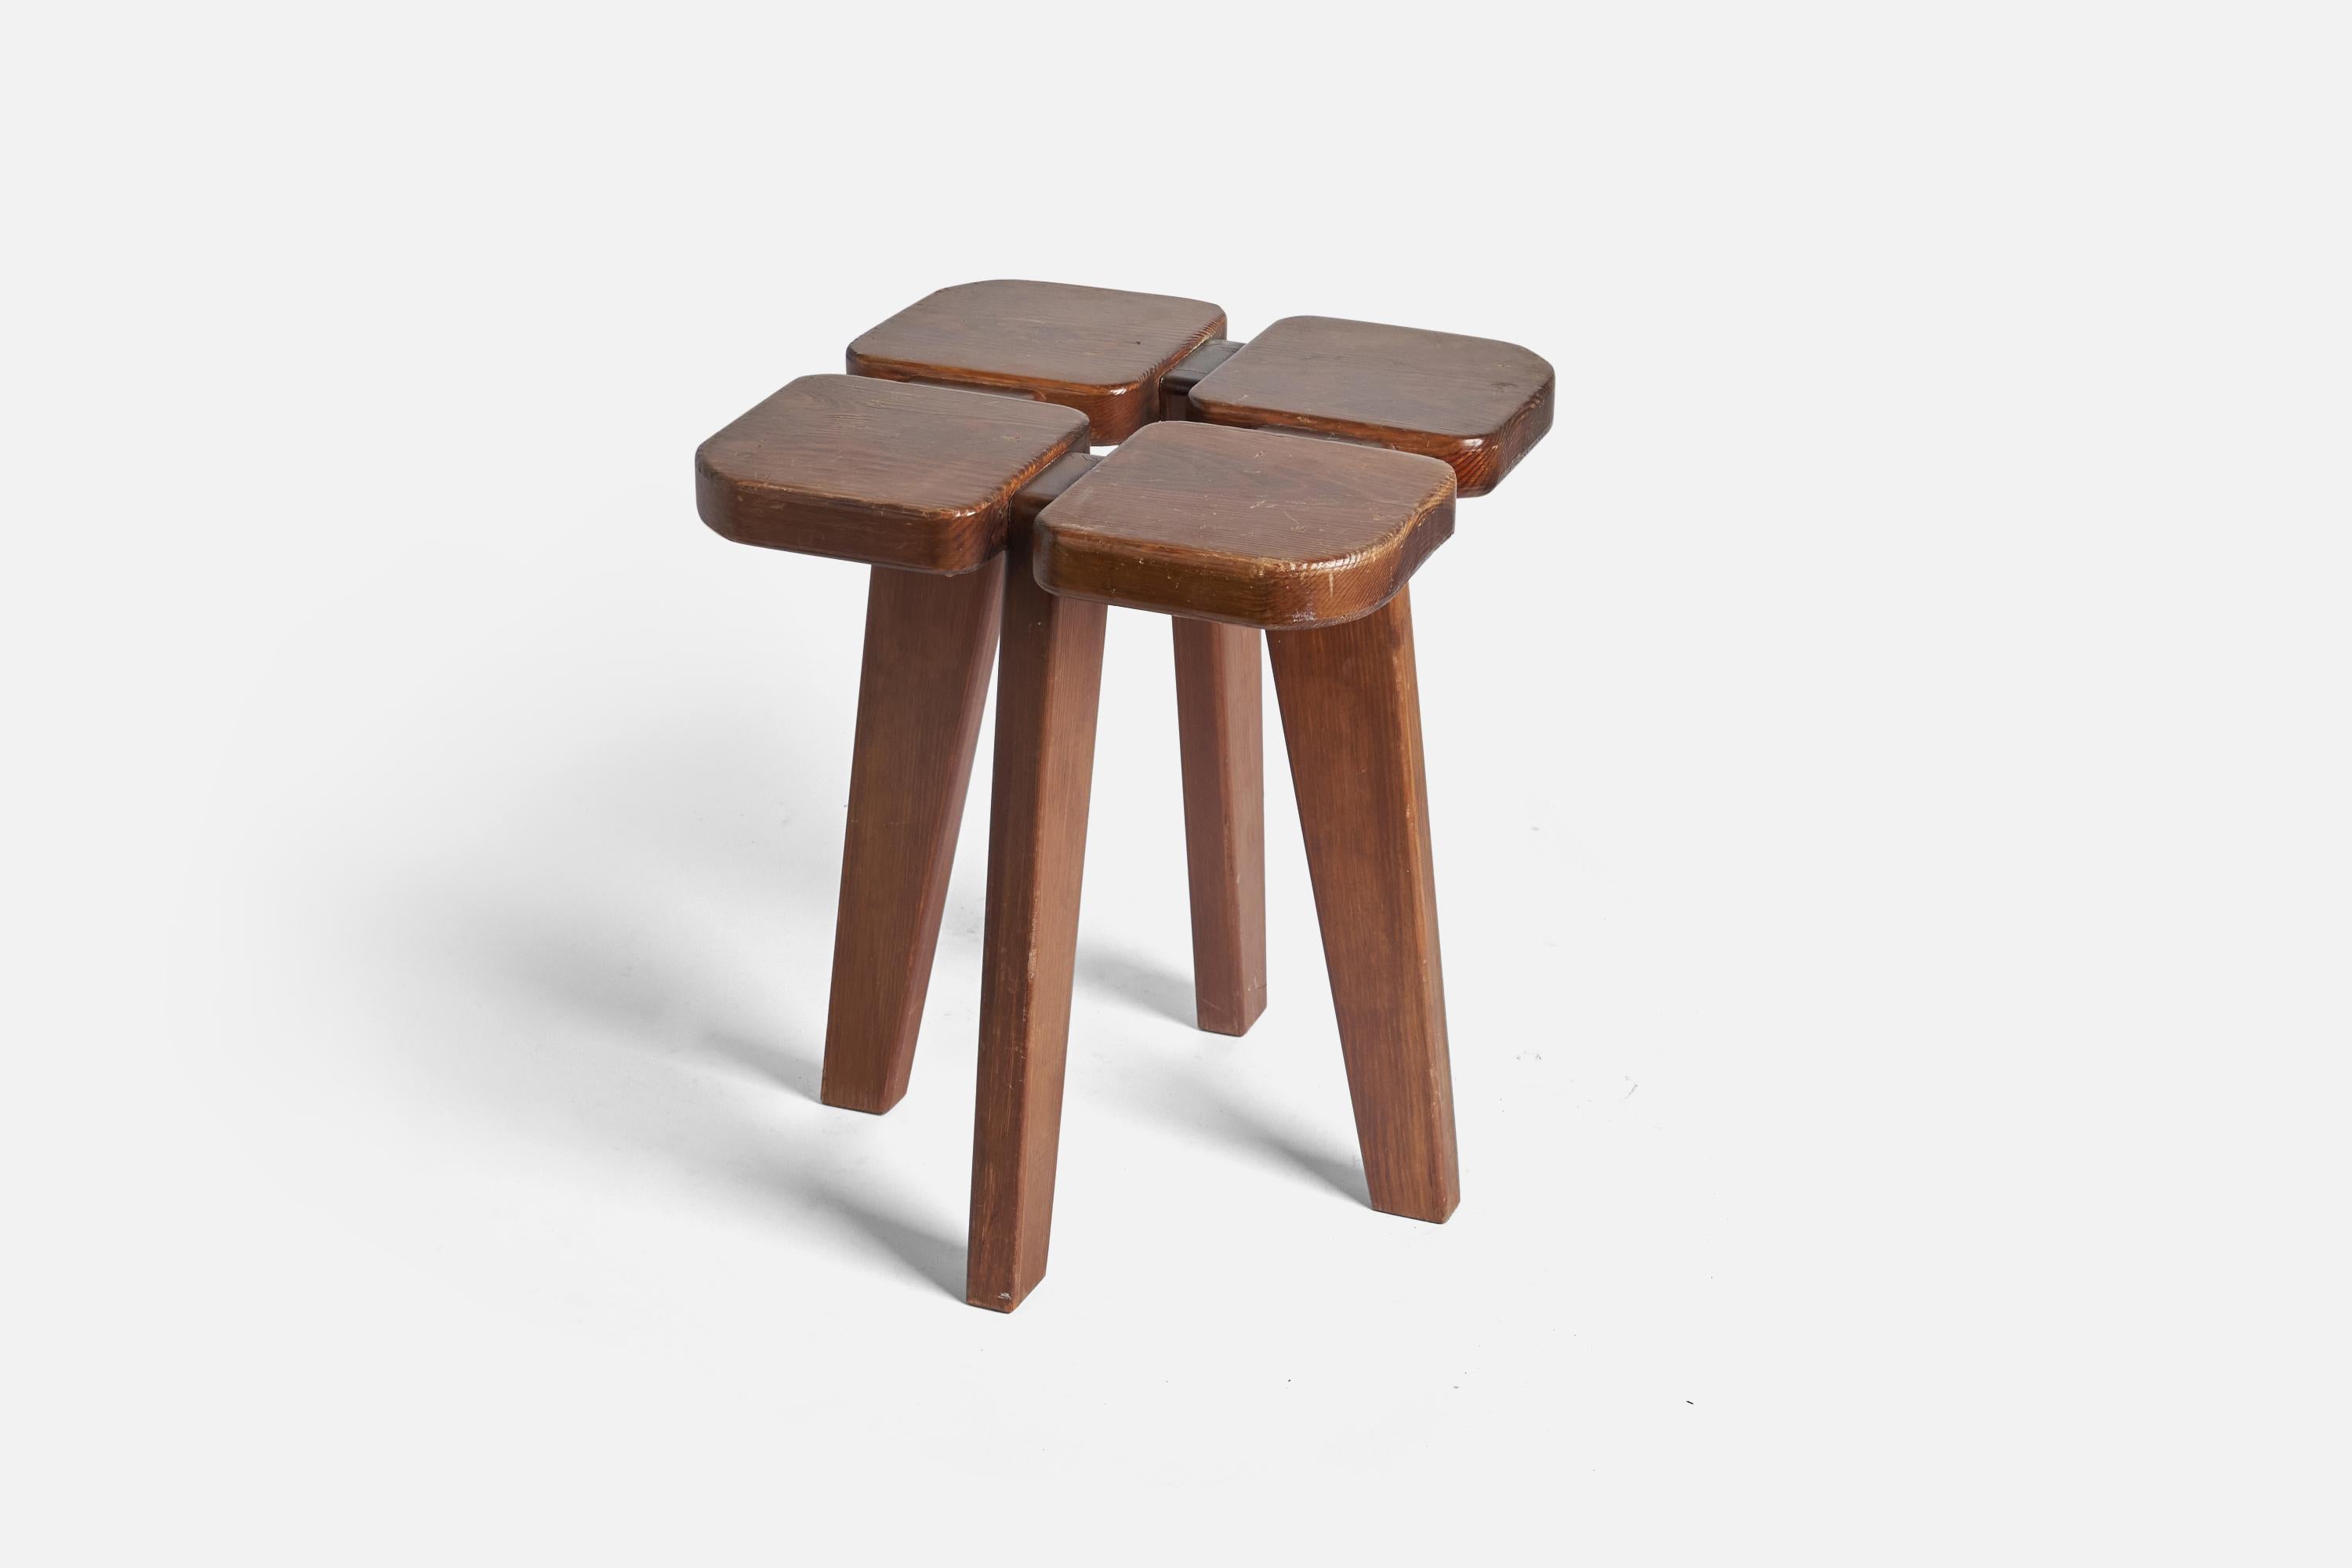 A stained pine stool, model 